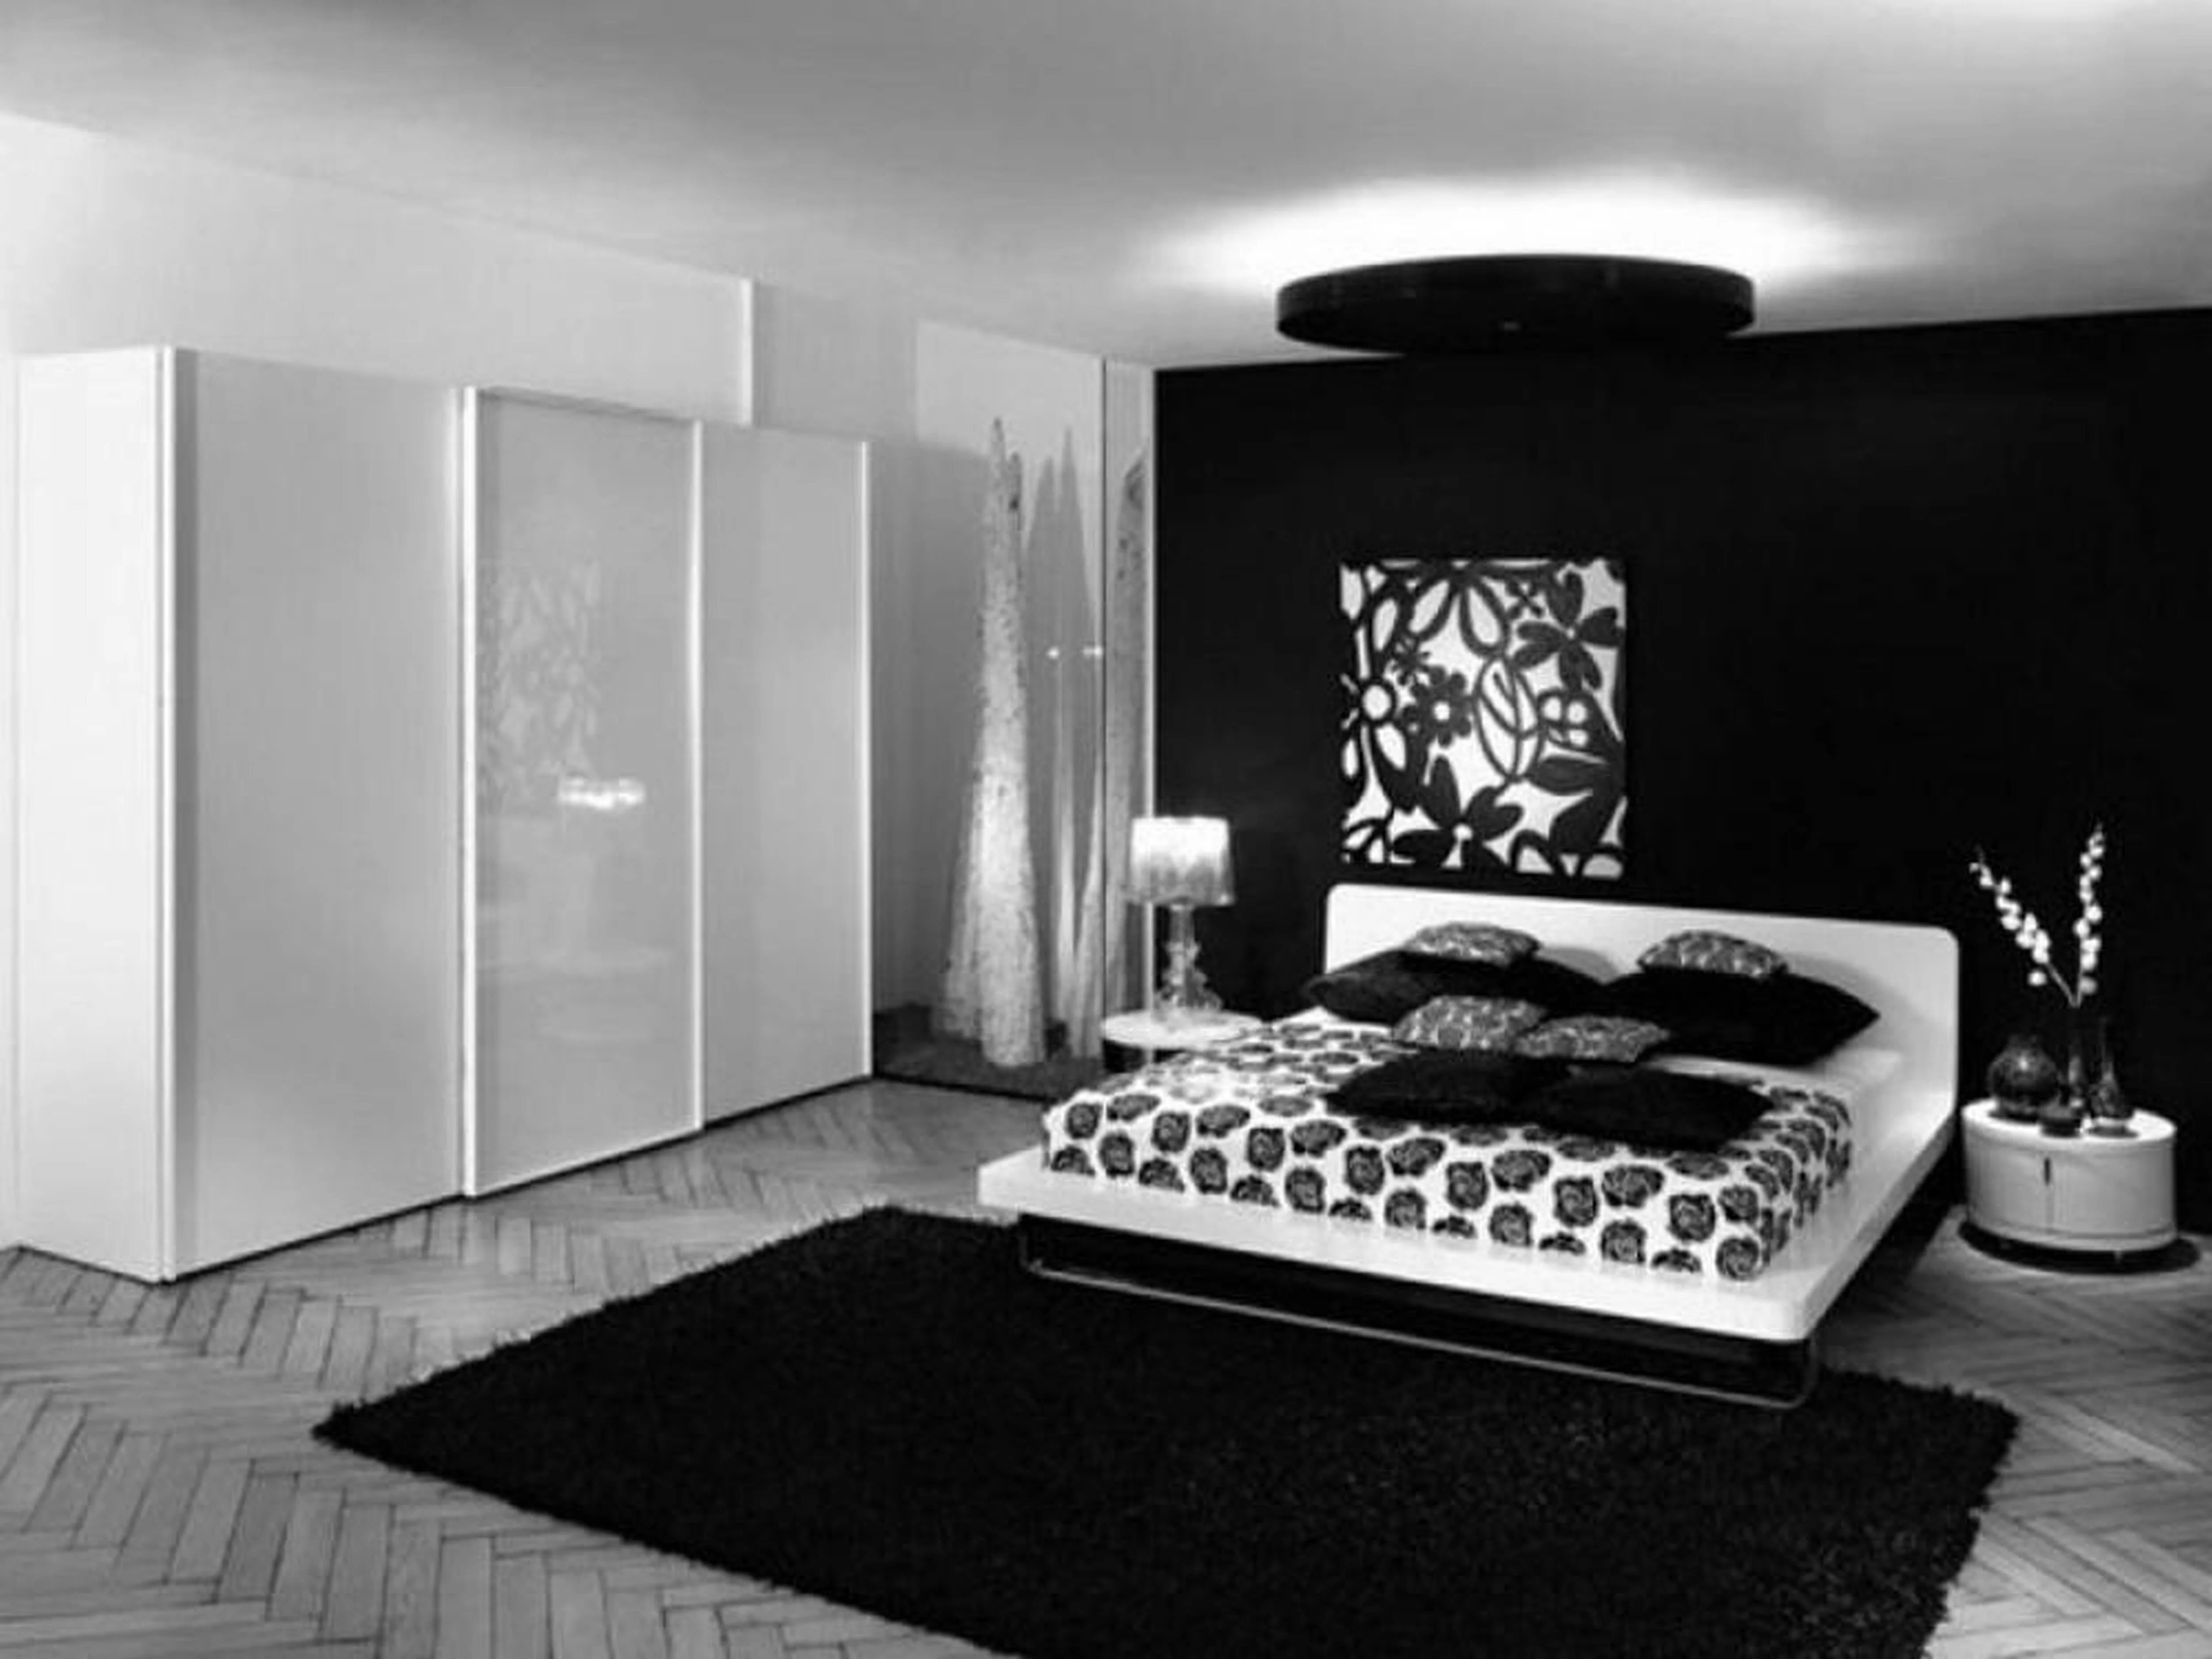 Design Your Bedroom Virtually Bedroom Designs For Teenage Guys Bedroom Wall Painting Designs Little Girl Bedroom Designs Bedroom Picture Black And White Bedrooms Throughout Waking Imagination In Creating Creations Bedroom Design Ideas Black And White